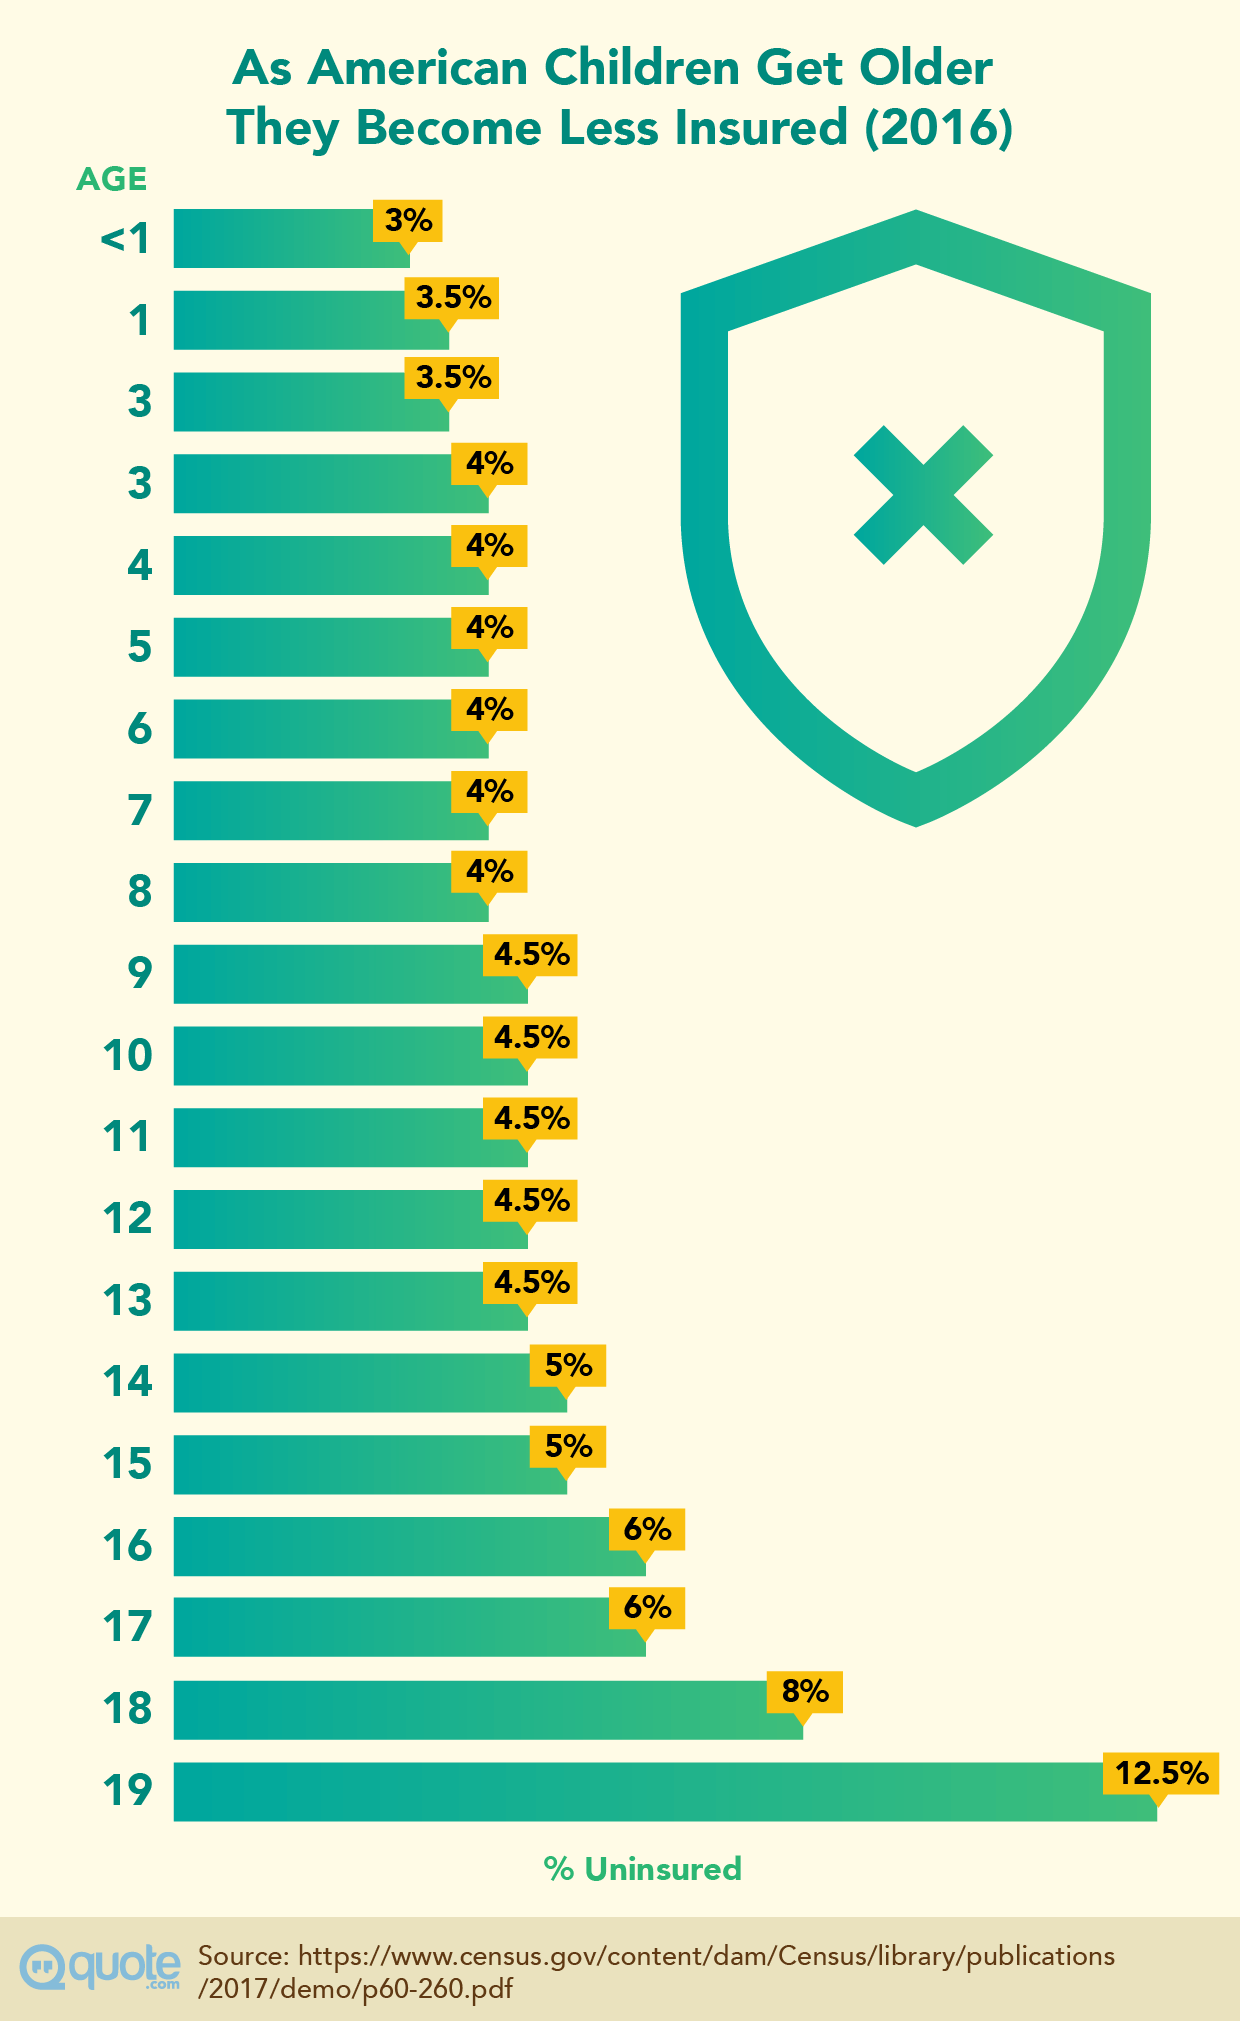 Percentage of Children Who Are Uninsured in 2016